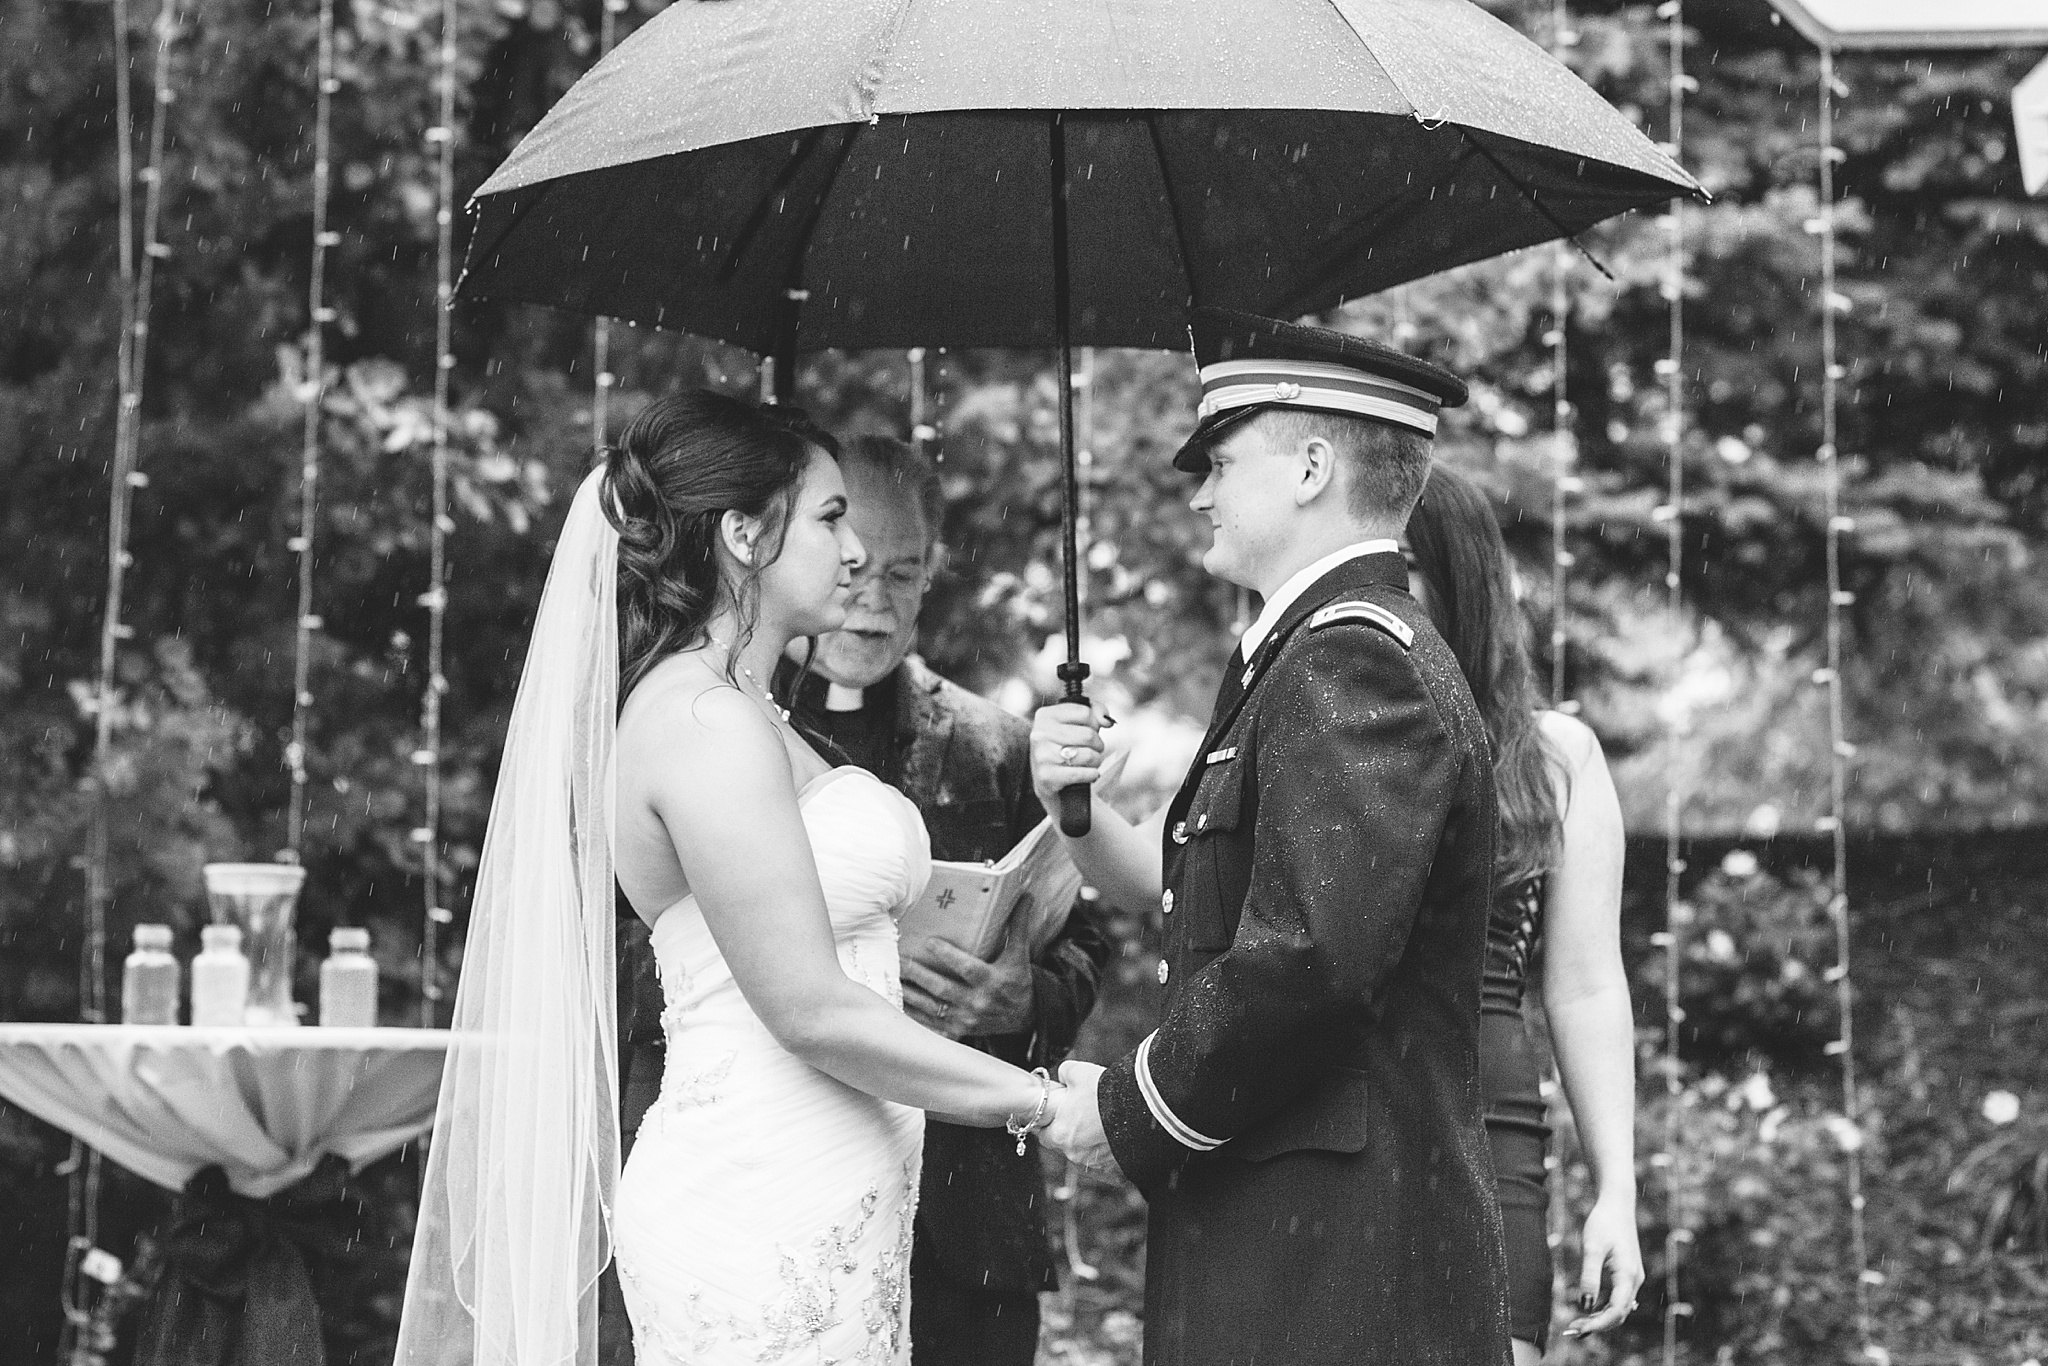 Bride & Groom exchanging vows during a rainy summer wedding. Tania & Chris' Denver Wedding at the Wedgewood Ken Caryl by Colorado Wedding Photography, Jennifer Garza. Colorado Wedding Photographer, Colorado Wedding Photography, Denver Wedding Photographer, Denver Wedding Photography, US Marine Corp Wedding, US Marine Corp, Military Wedding, US Marines, Wedgewood Weddings, Wedgewood Weddings Ken Caryl, Colorado Wedding, Denver Wedding, Wedding Photographer, Colorado Bride, Brides of Colorado